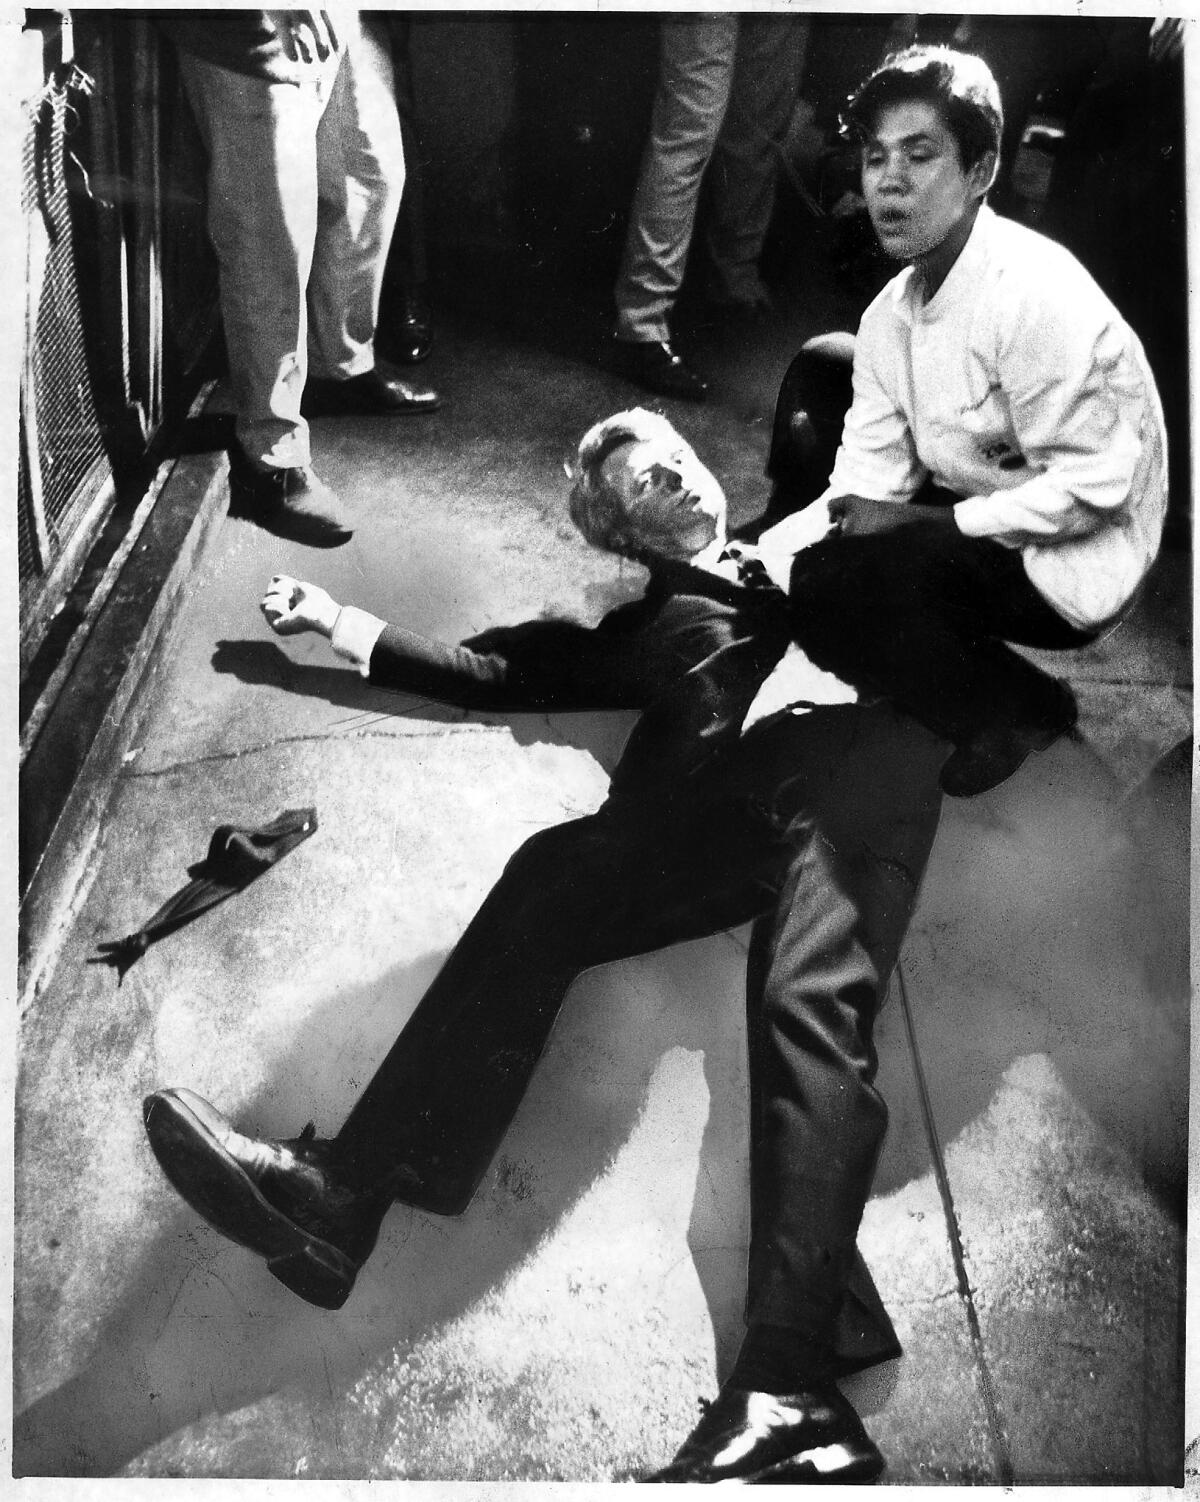 June 5, 1968: Presidential candidate Robert F. Kennedy lies on the floor at the Ambassador Hotel.